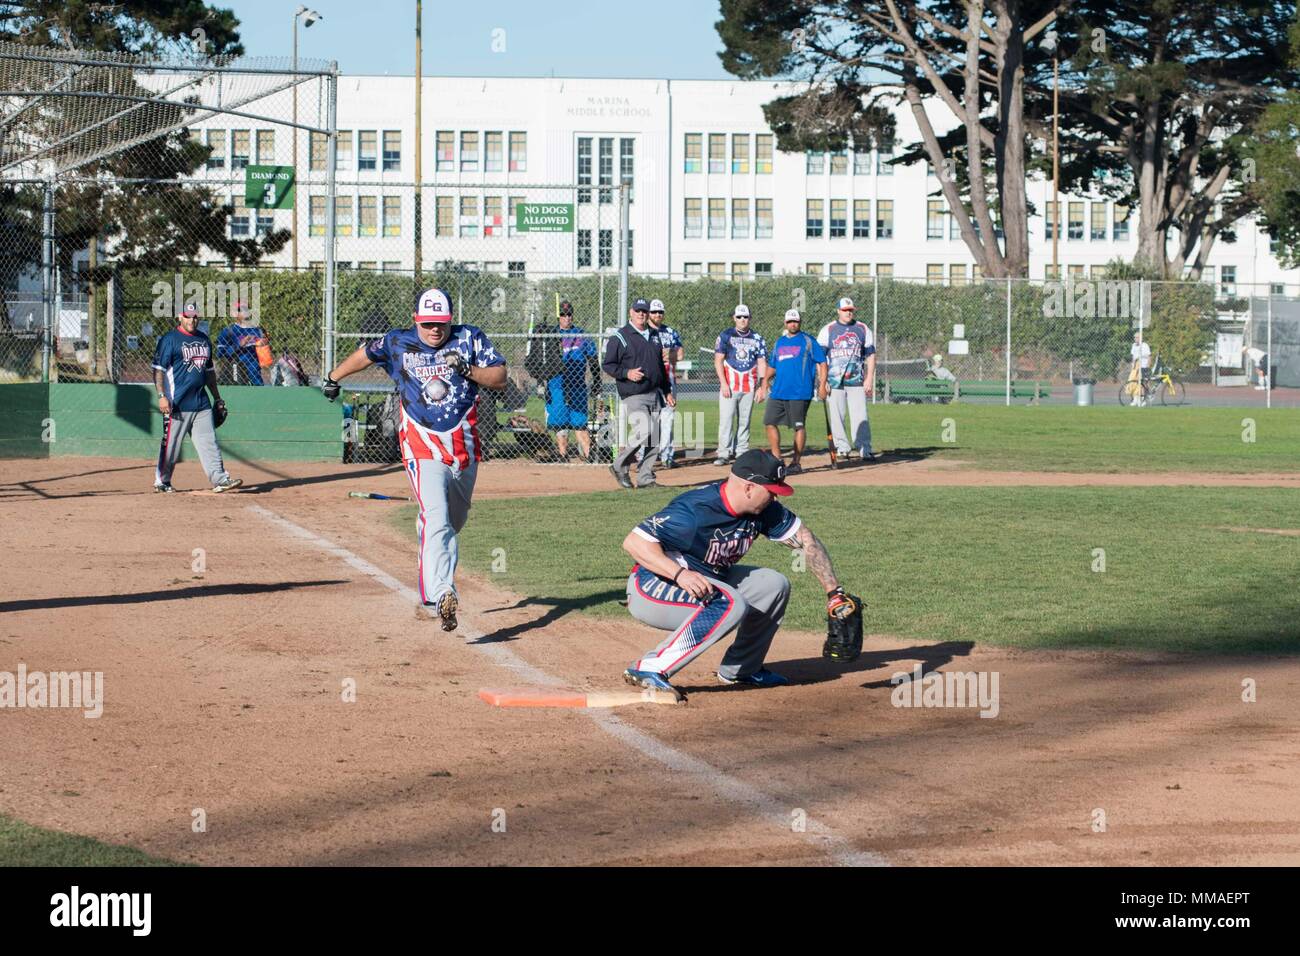 SAN FRANCISCO (Oct. 5, 2017) U.S. Coast Guard personnel play against members of the Oakland Police Department at a softball tournament during Fleet Week San Francisco.  Fleet week provides an opportunity for the American public to meet their Navy, Marine Corps, and Coast Guard team and to experience America's sea services, highlighting naval personnel, equipment, technology, and capabilities, with an emphasis on humanitarian assistance and disaster response.  (U.S. Navy photo by Mass Communication Specialist 2nd Class Chelsea Troy Milburn) Stock Photo